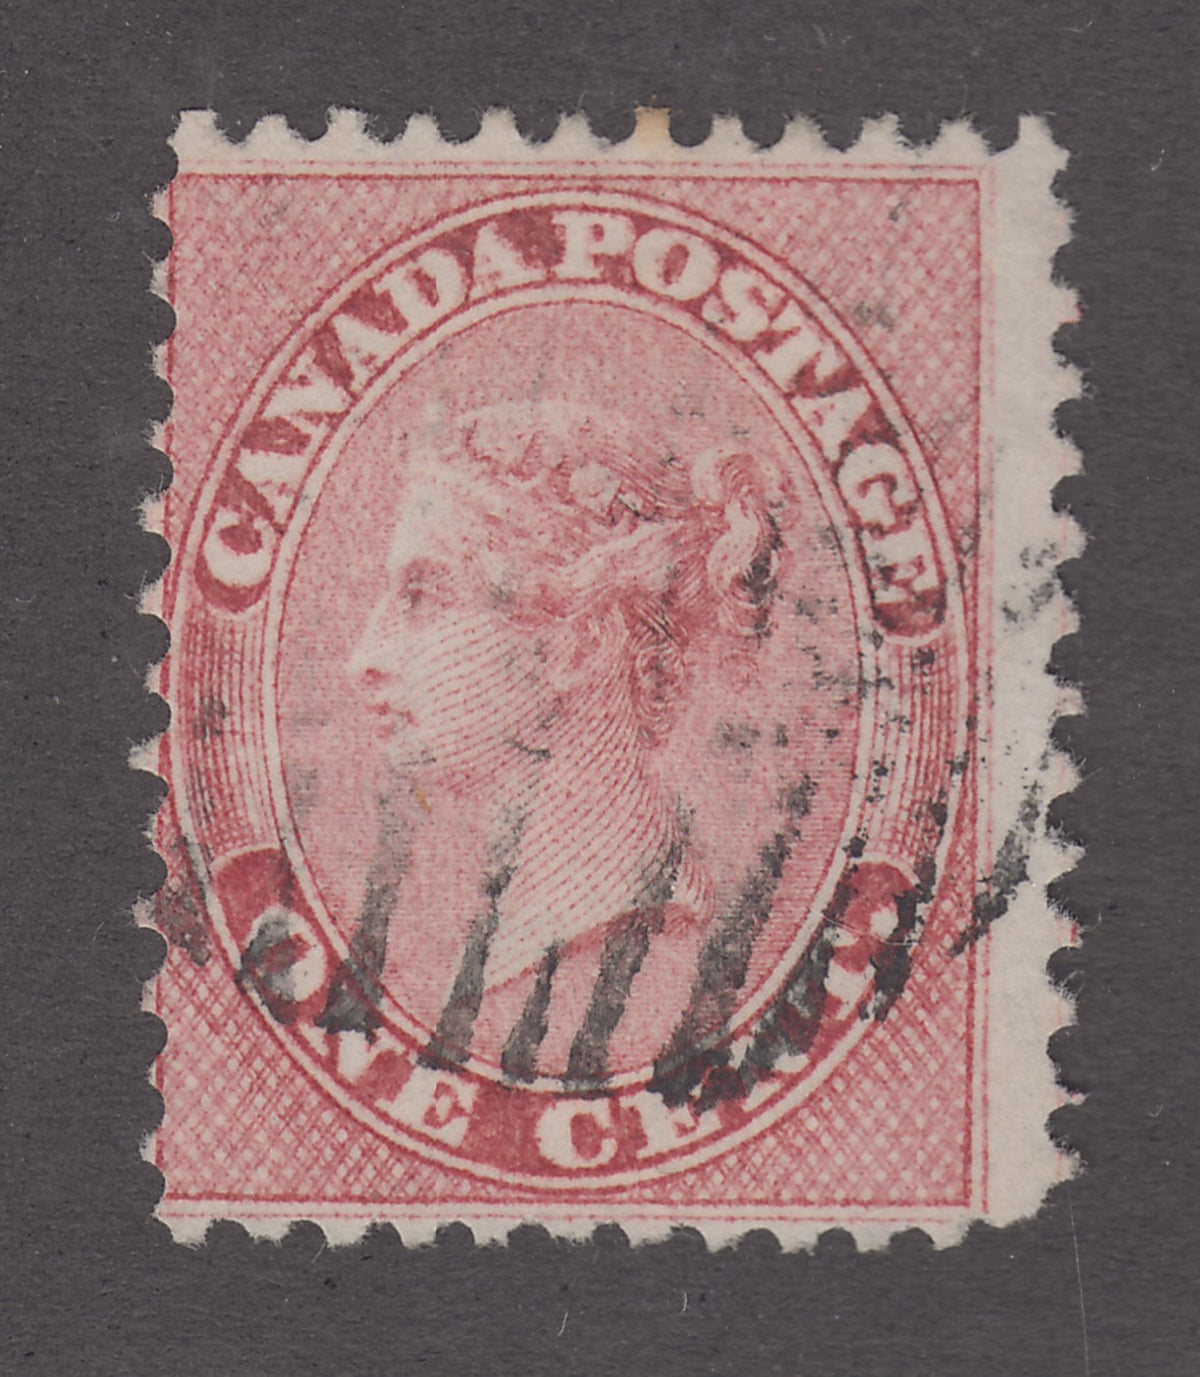 0014CA1802 - Canada #14 - Used Double Print